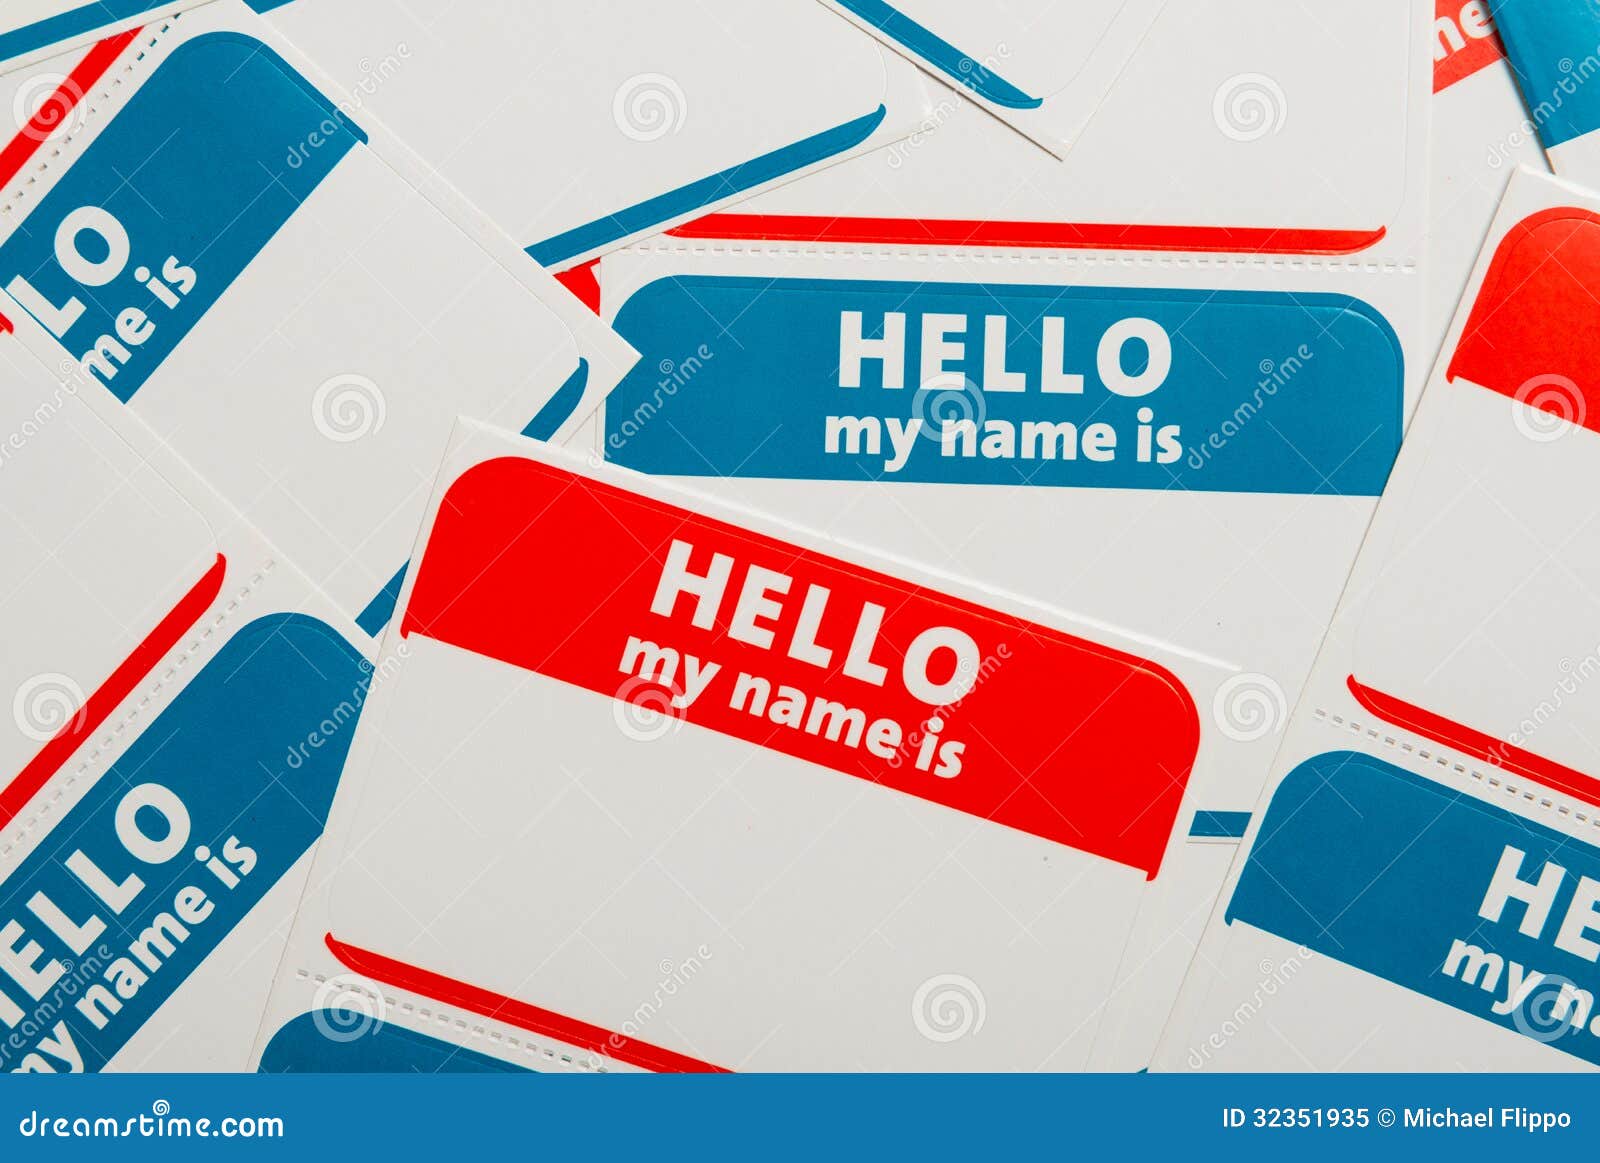 stack of name tags or badges